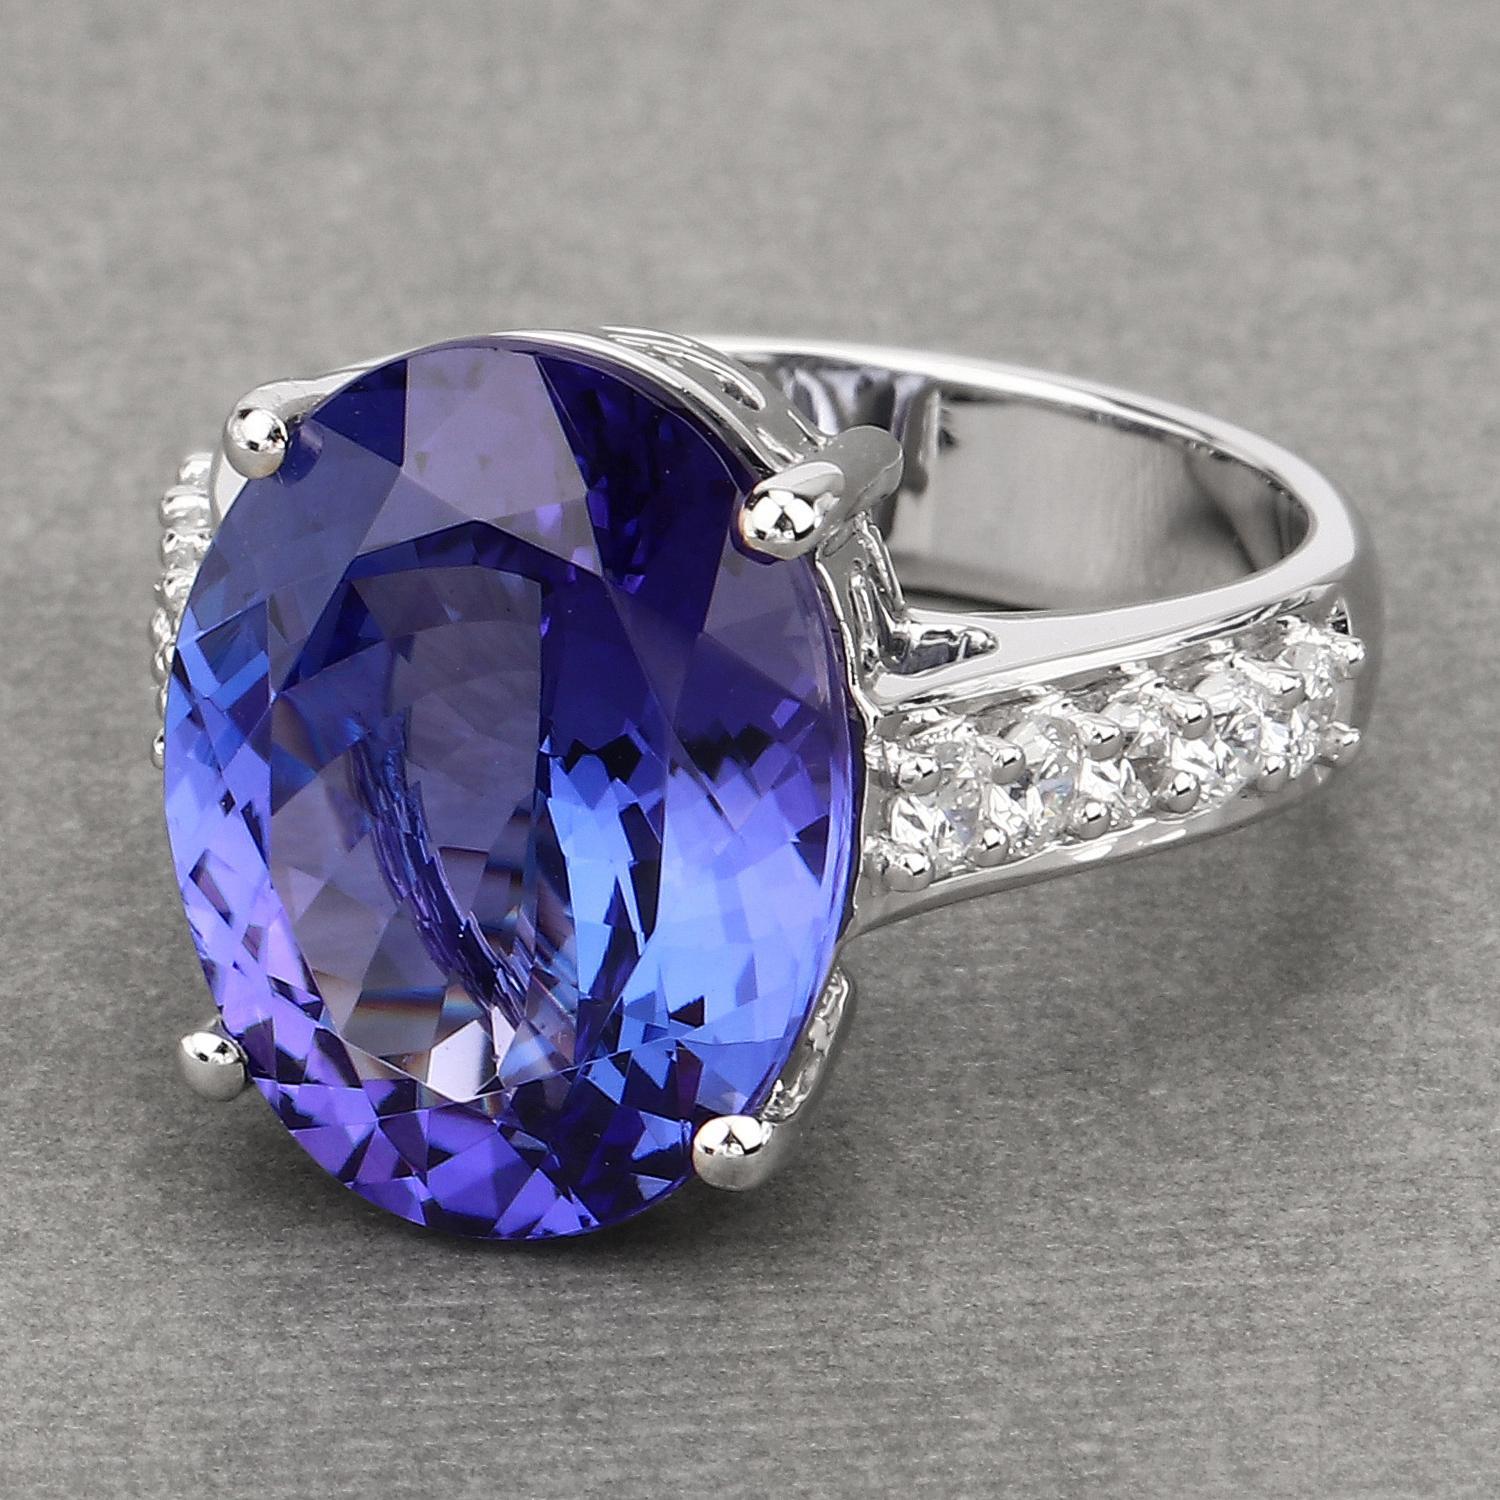 10.94 Carat Genuine Tanzanite and Diamond 18 Karat White Gold Cocktail Ring In New Condition For Sale In Great Neck, NY